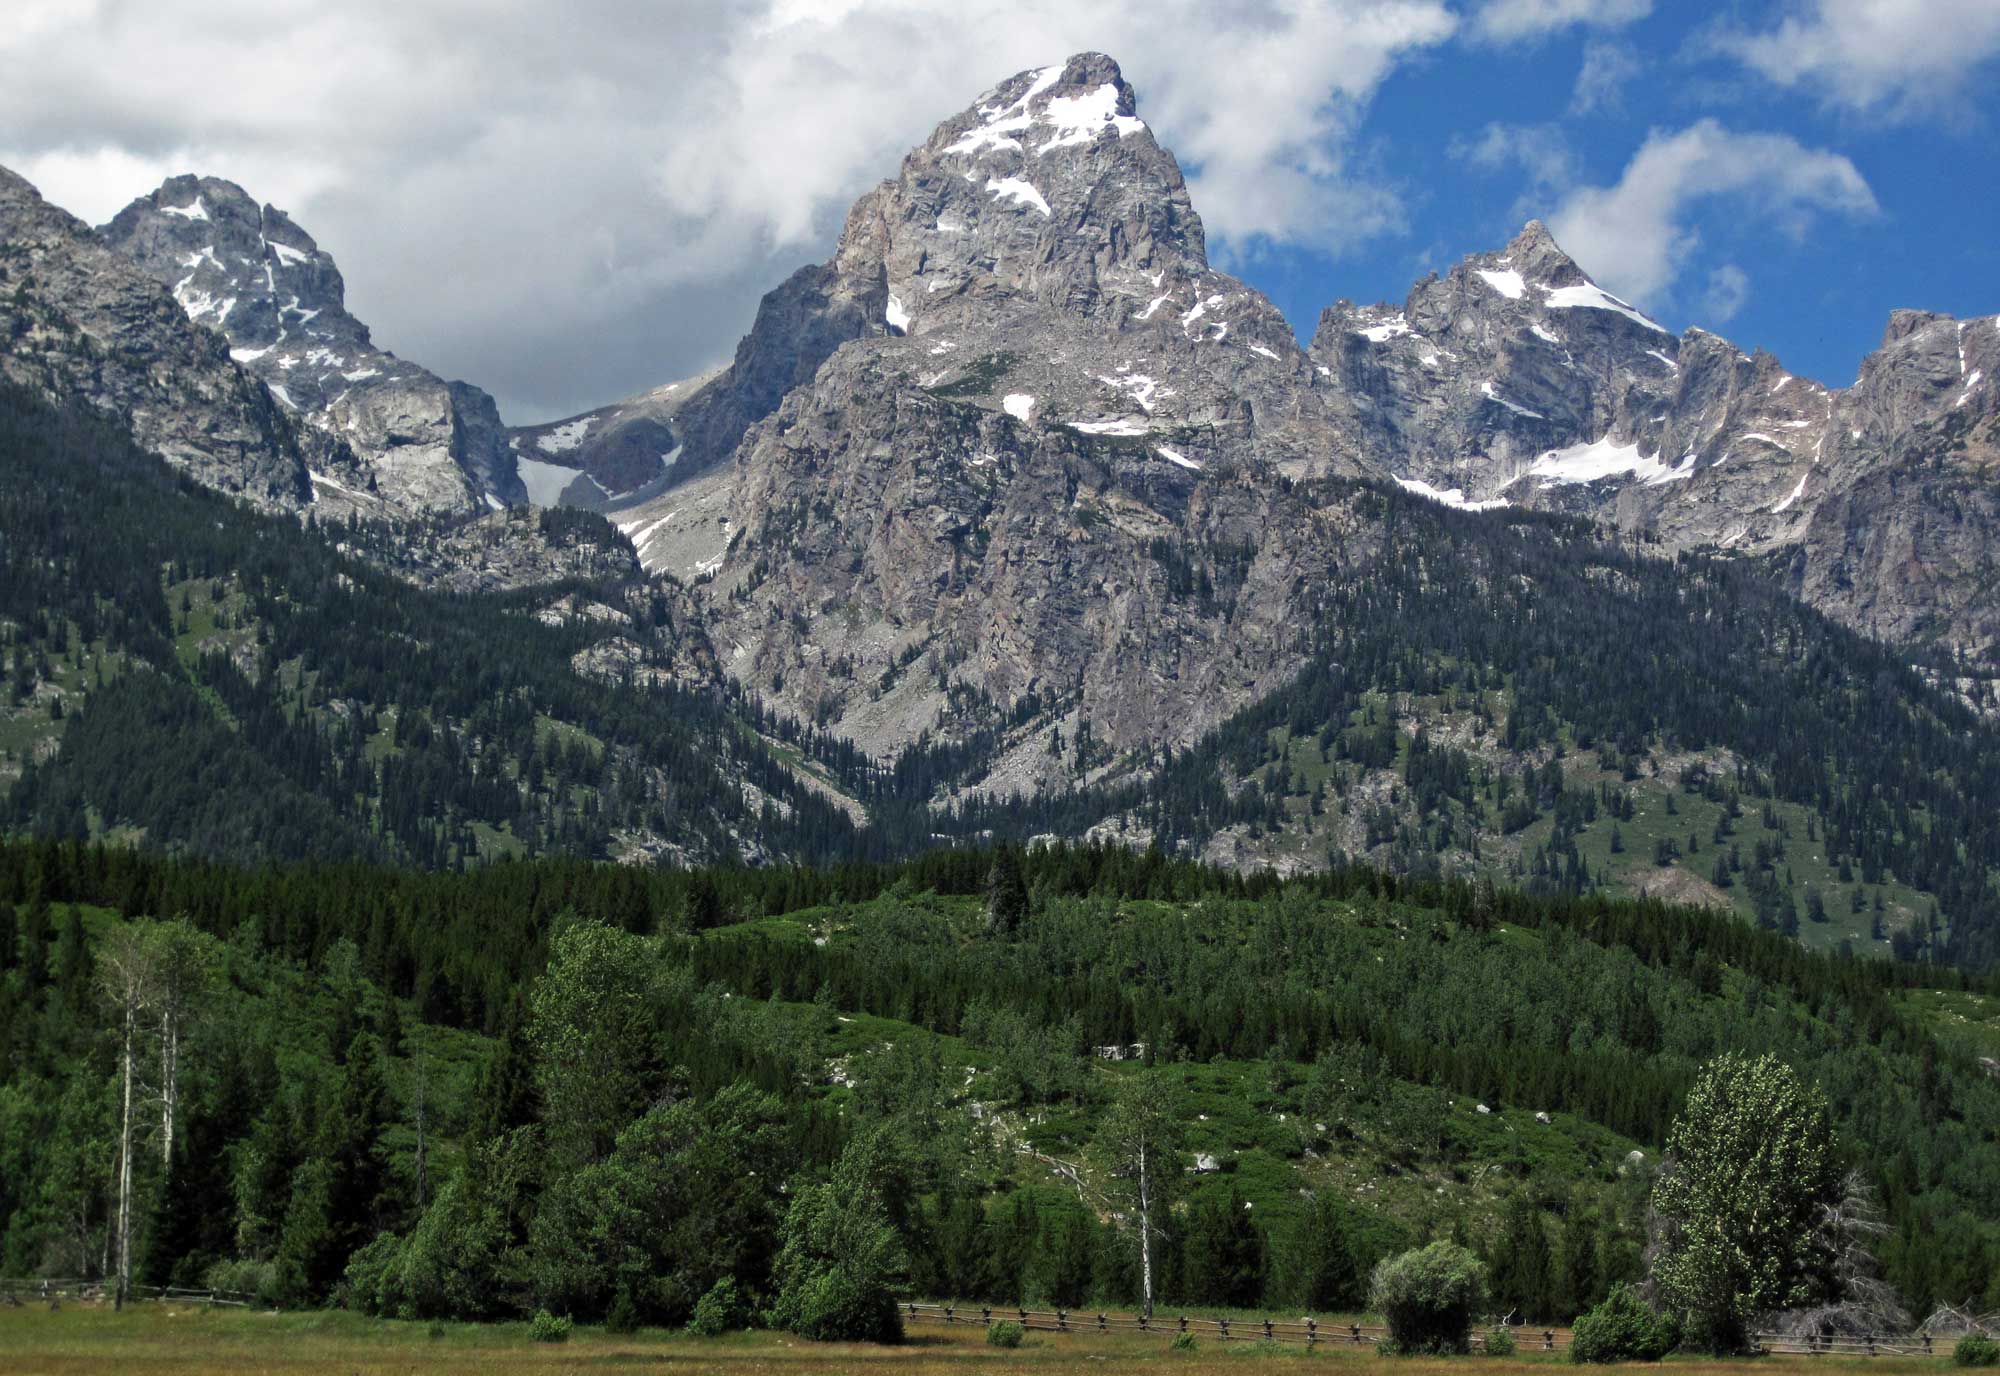 Photograph of Grand Tetons, Wyoming. The photo shows a rugged, triangular mountain peak made of gray rock in its center with additional shorter peaks flanking it. The rocky peaks have patches of snow. The slopes at lower elevation are covered with conifers. A but of a flat field can be seen in at the bottom foreground of the image.